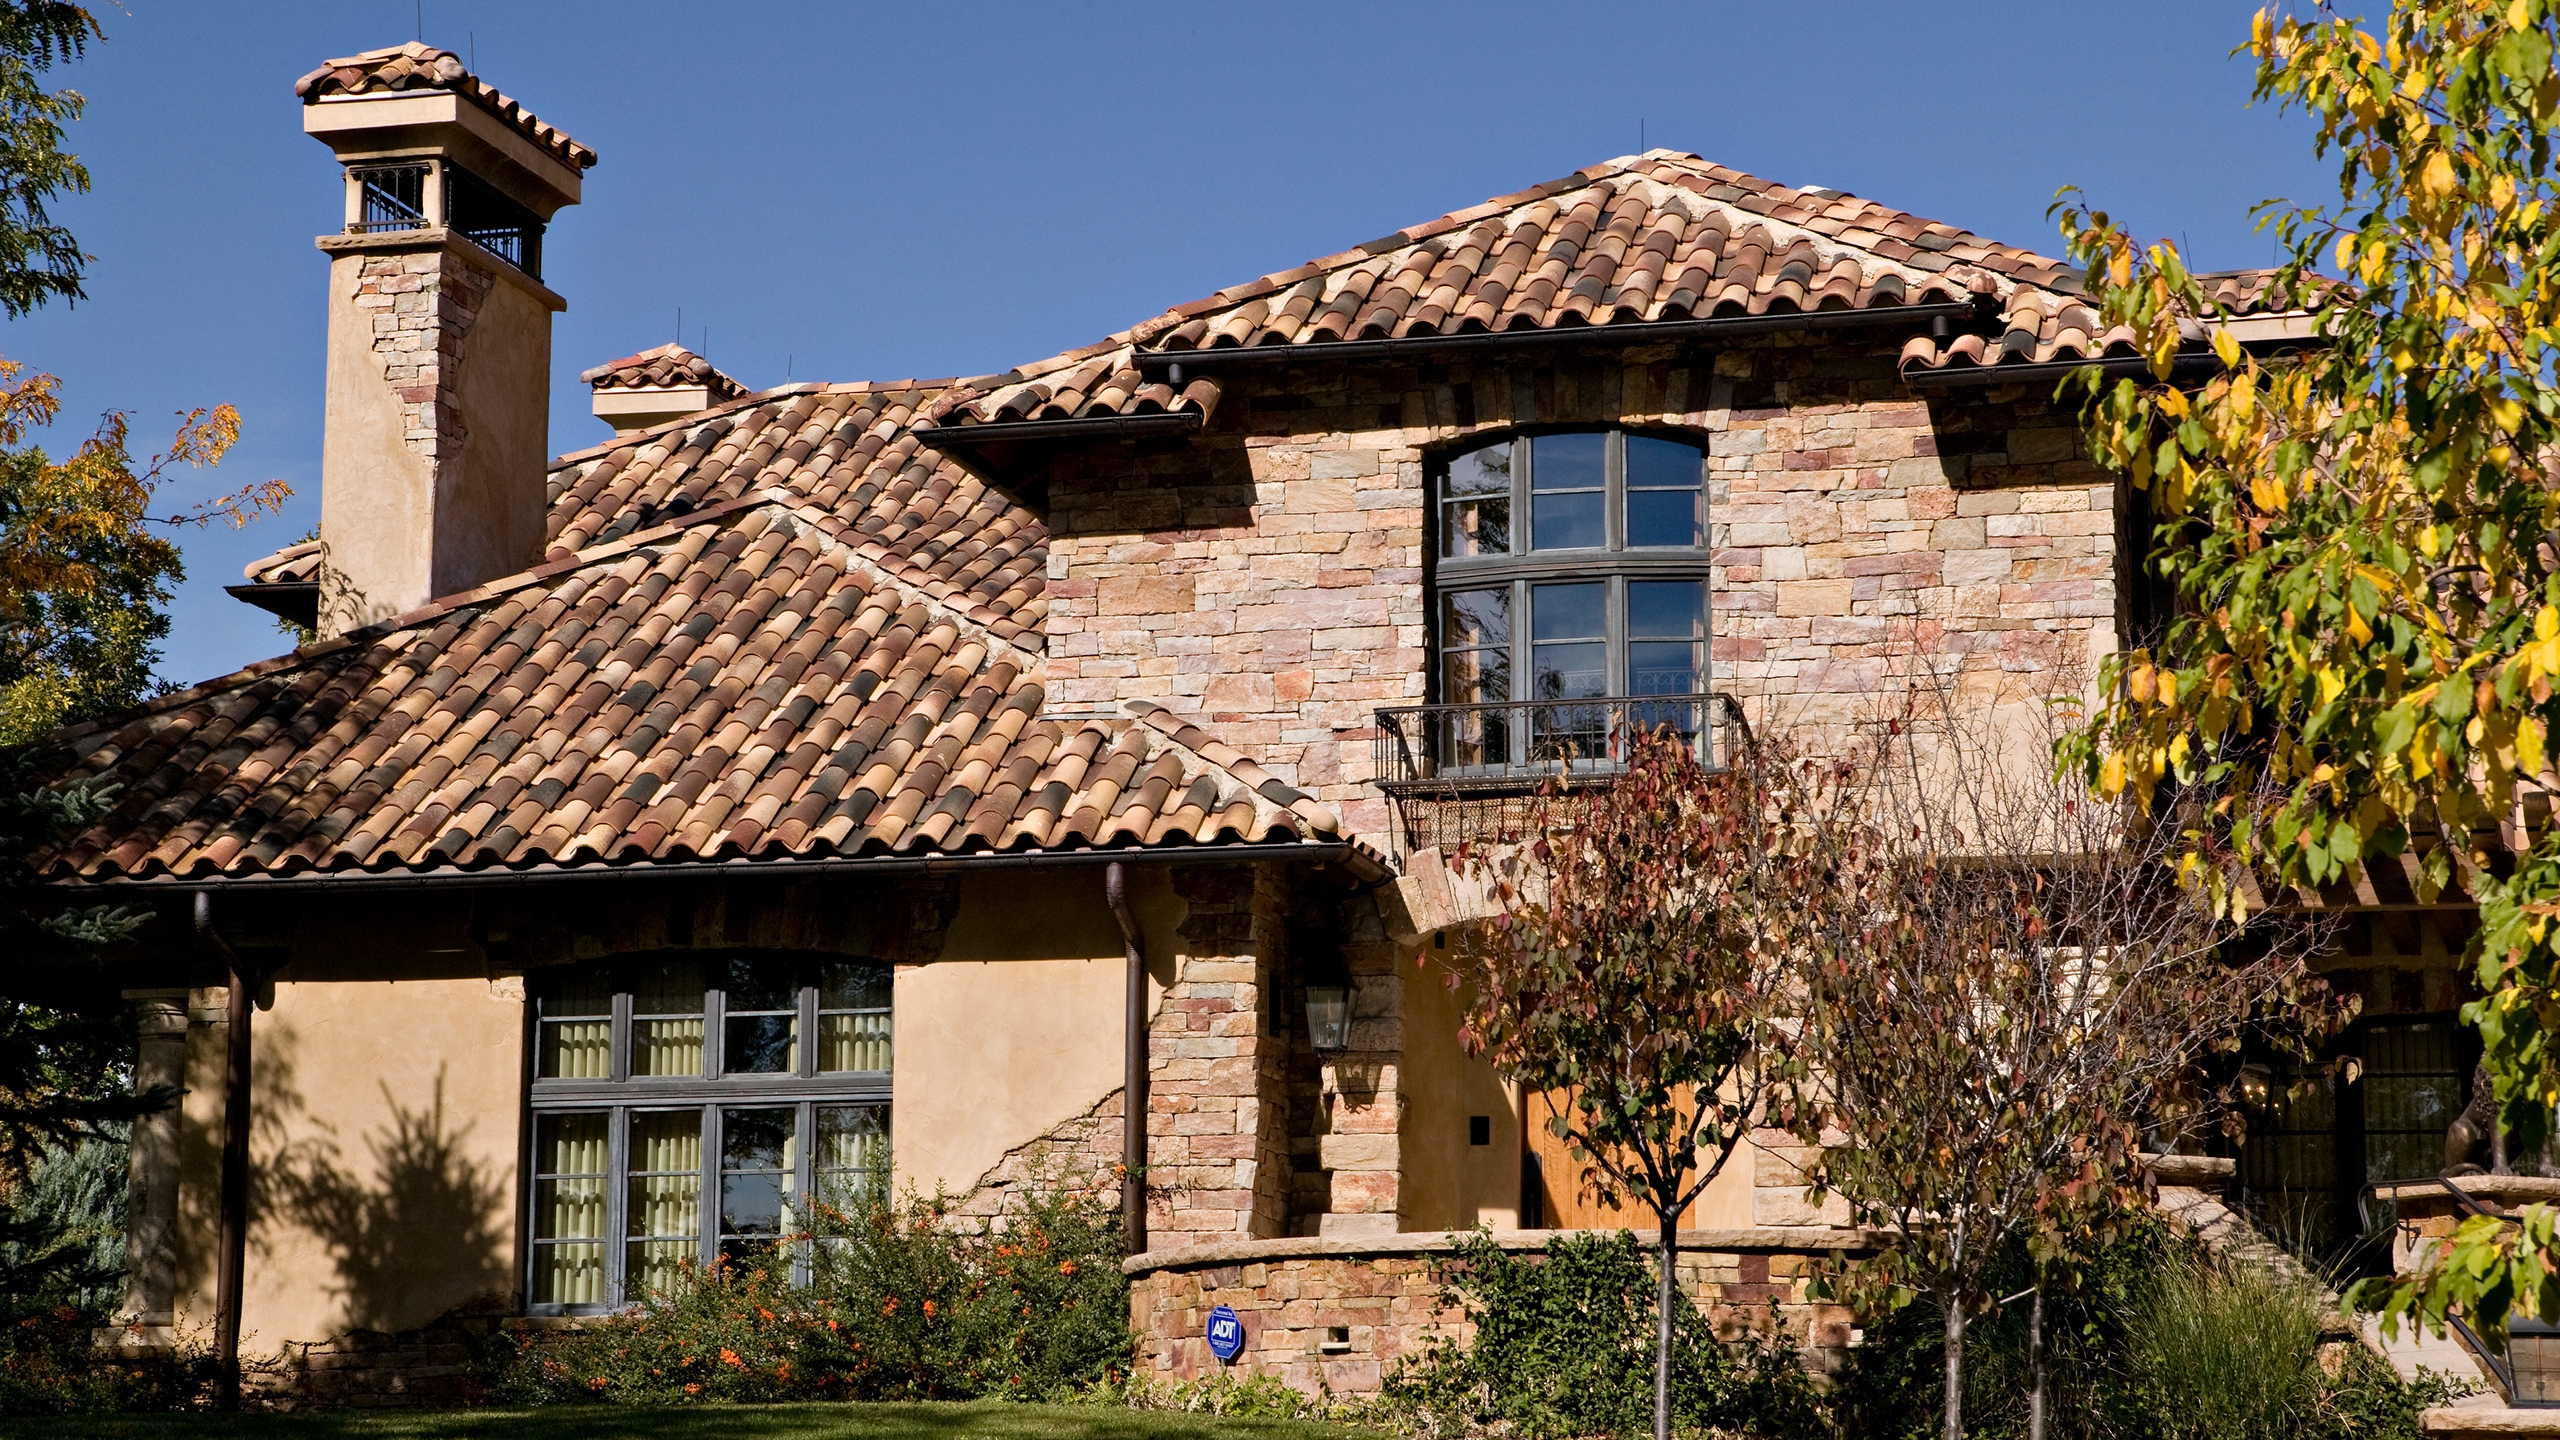 Private Residence - Cherry Hills Village | Ludowici Roof Tile